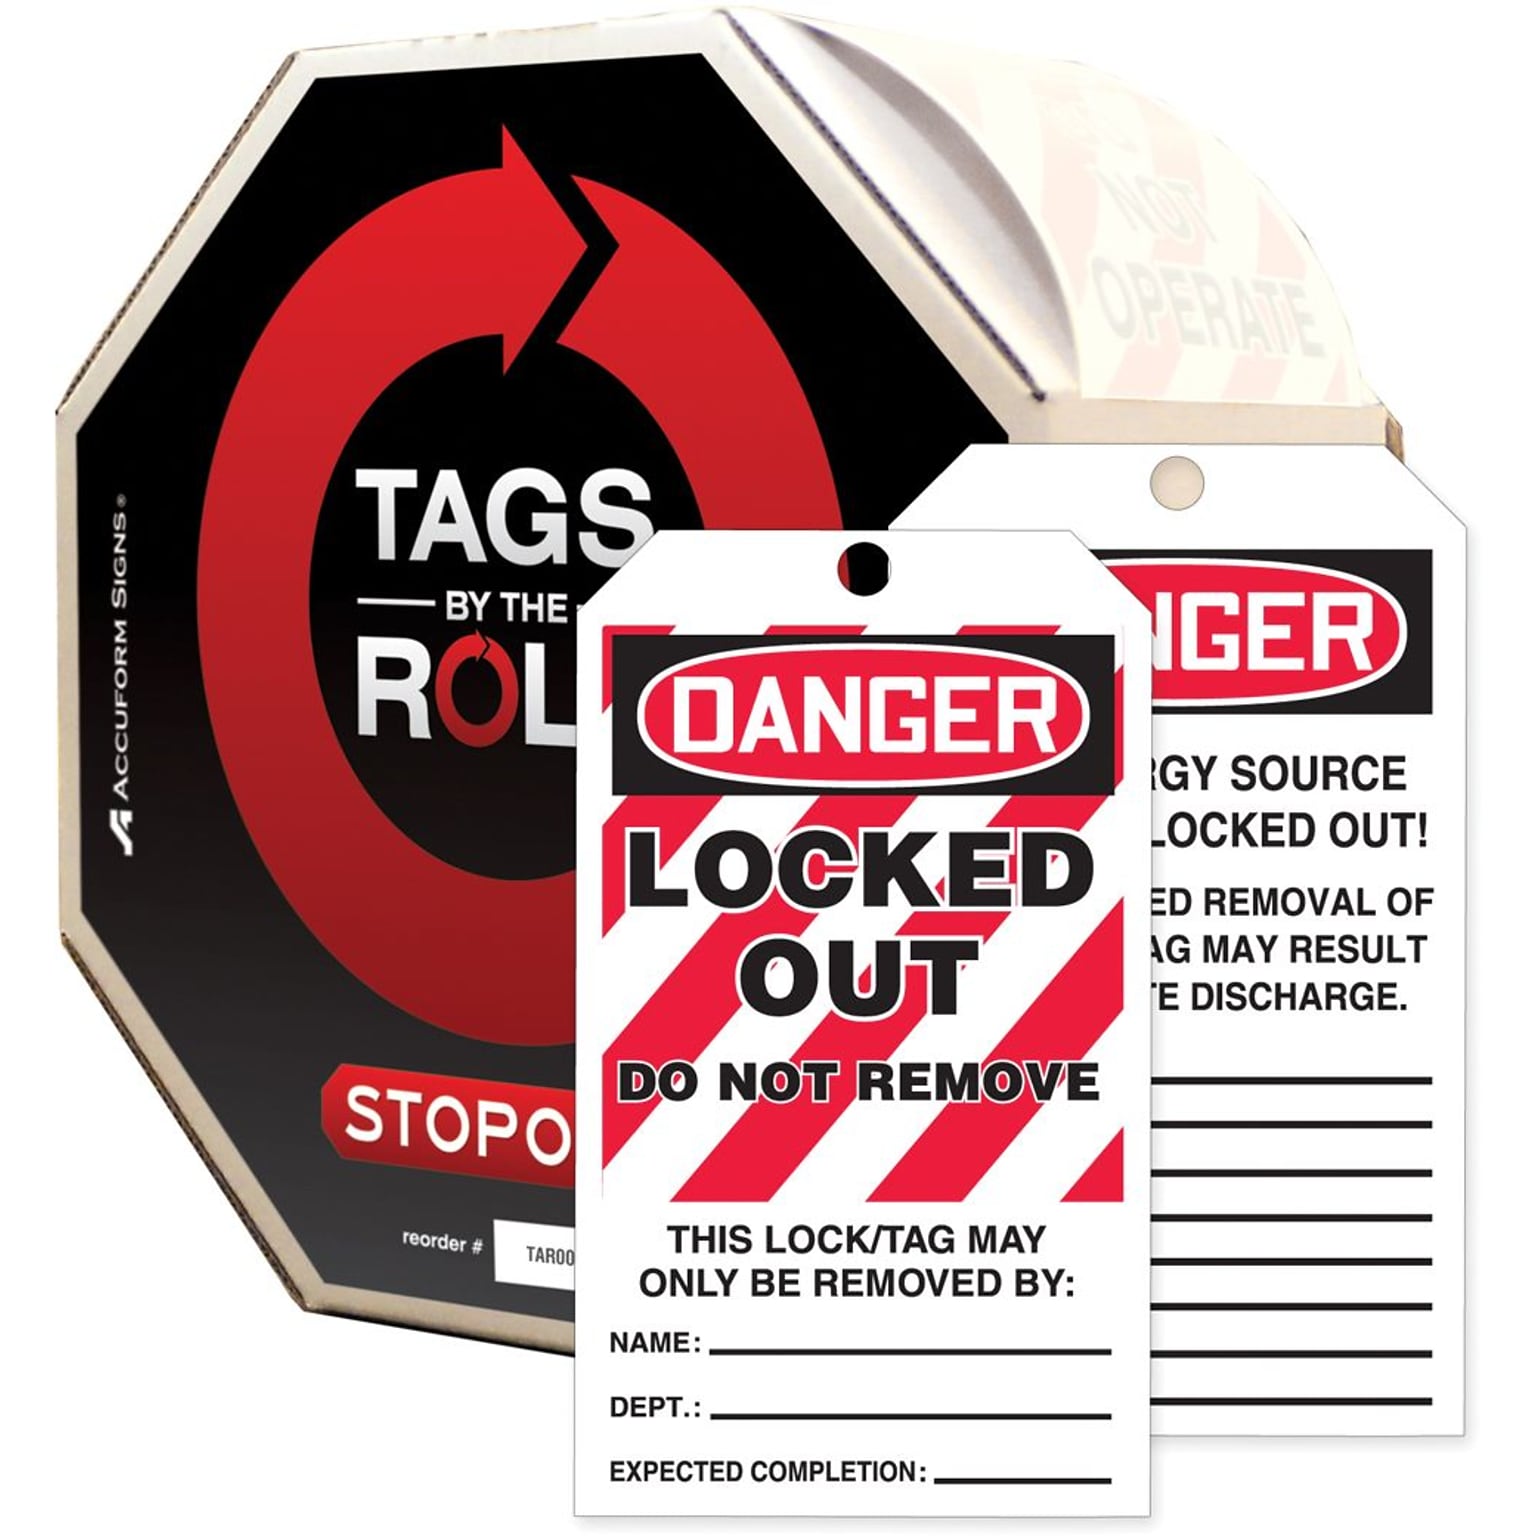 Accuform Tags By-The-Roll 6 1/4 x 3 Lockout Tag DANGER..RE, Black/Red On White, 100/Roll (TAR418)